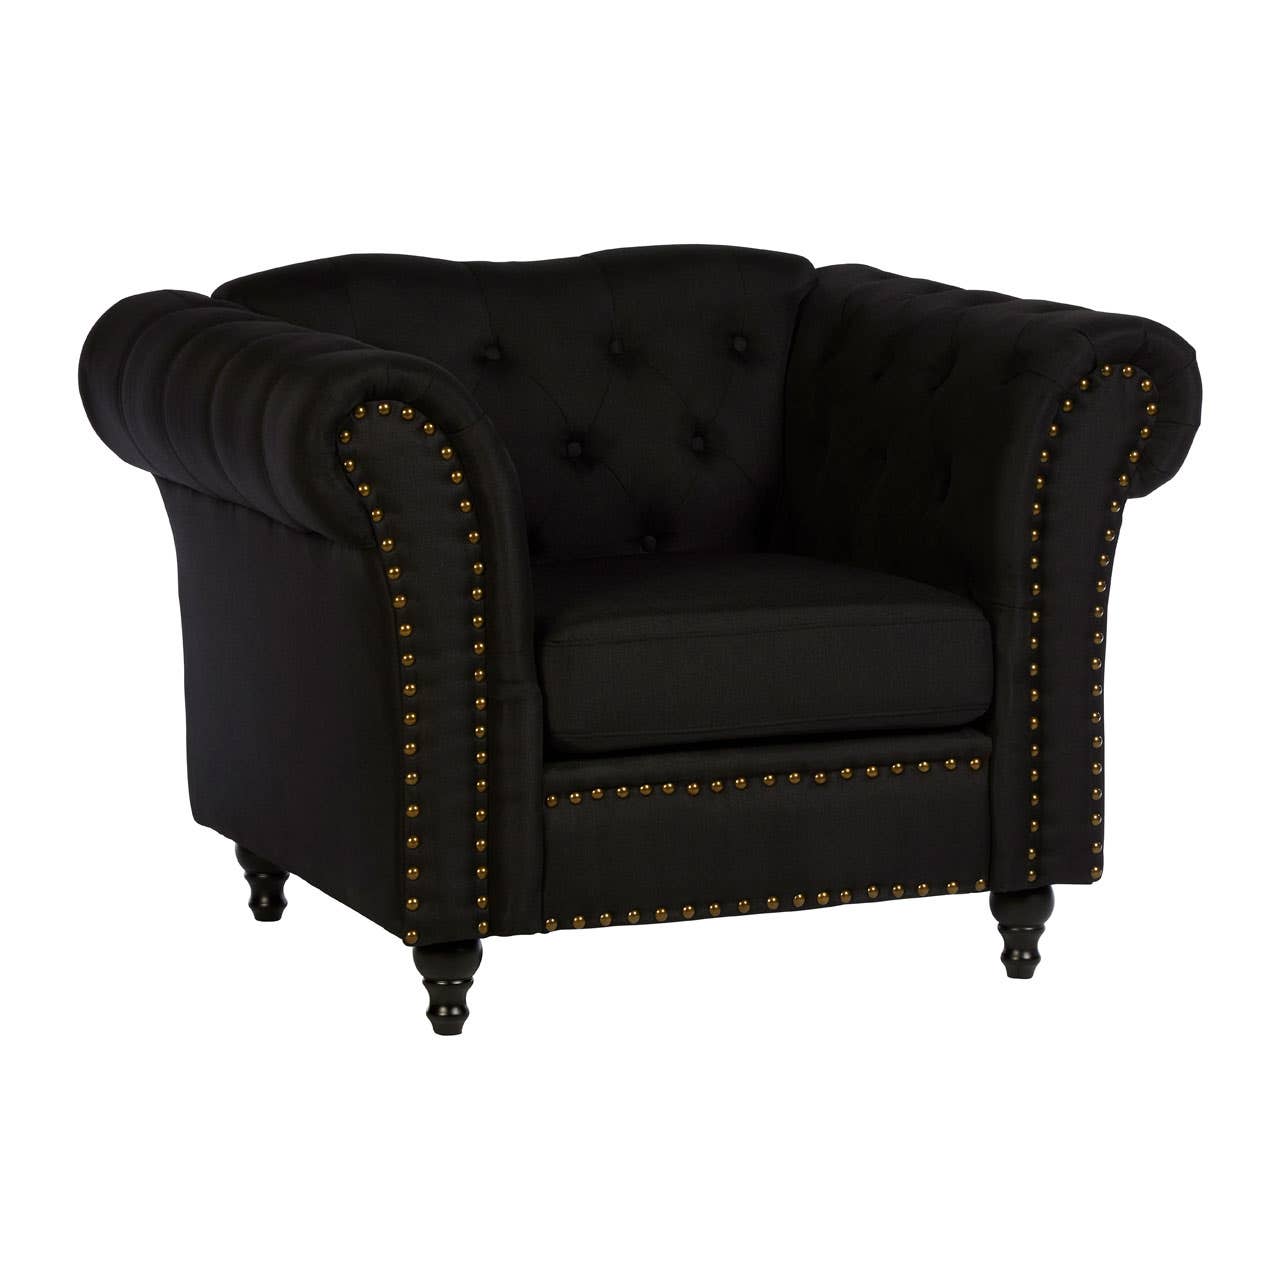 Fable Black Chesterfield Chair